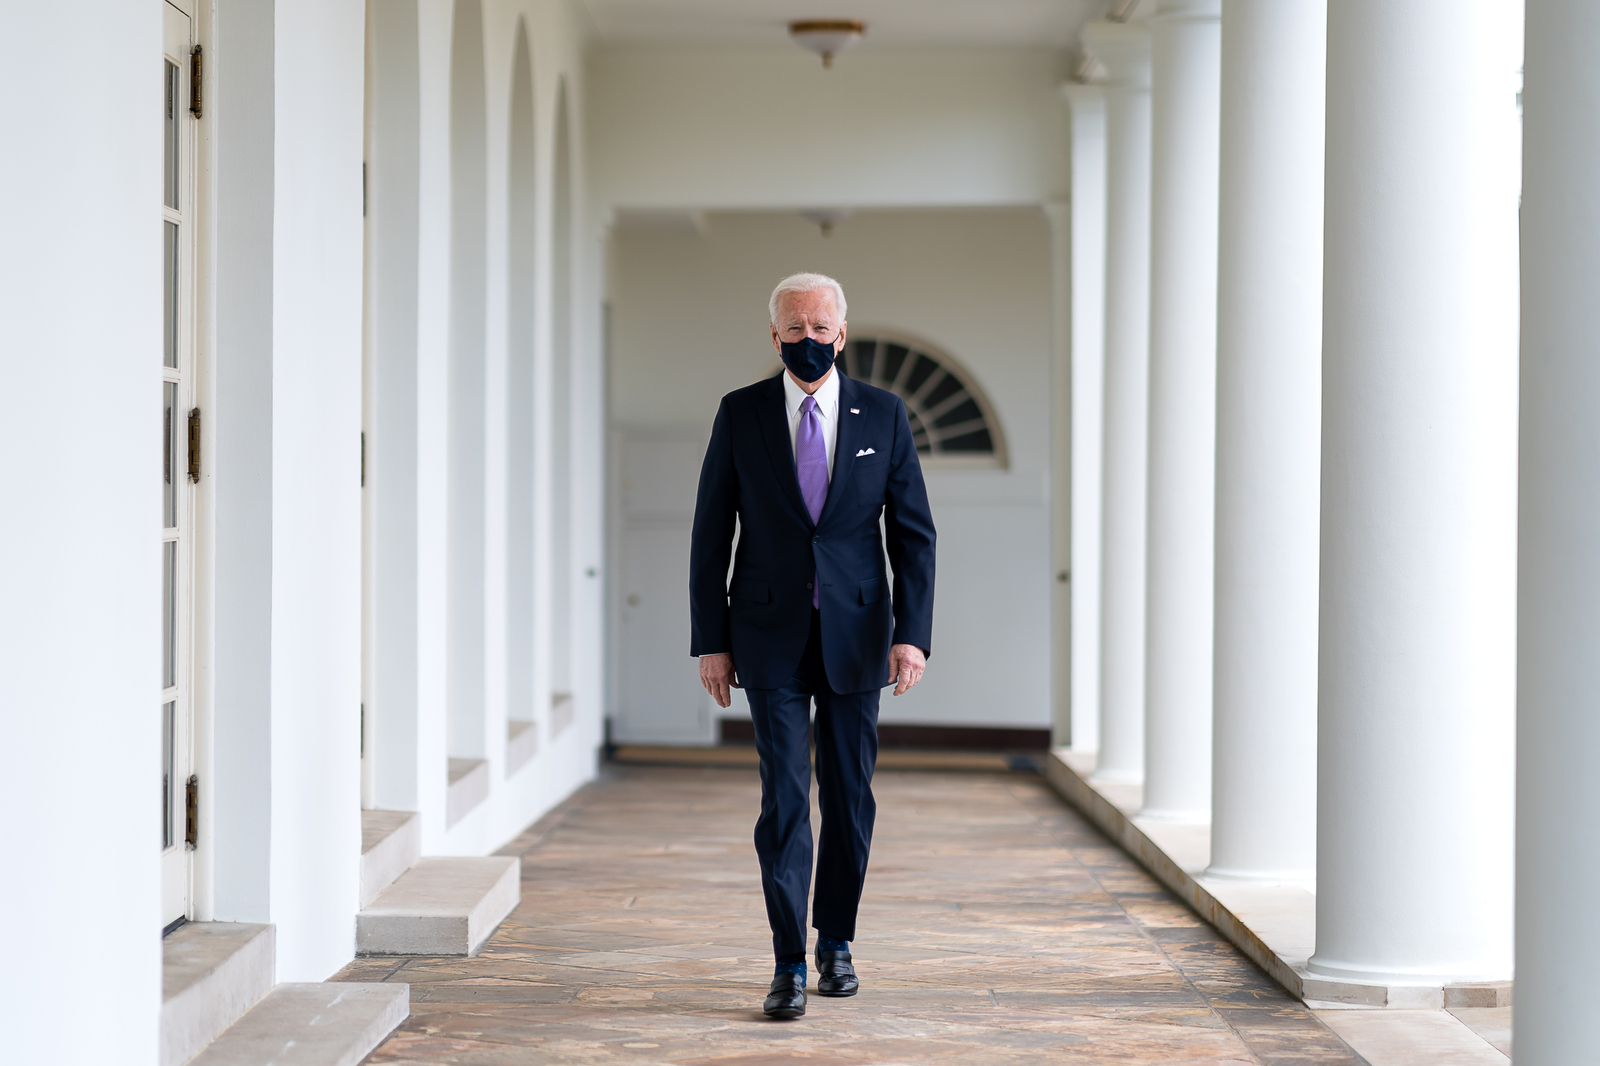 P20210121AS-0485: President Joe Biden walks along the Colonnade Thursday, Jan. 21, 2021, to the Oval Office of the White House. (Official White House Photo by Adam Schultz)